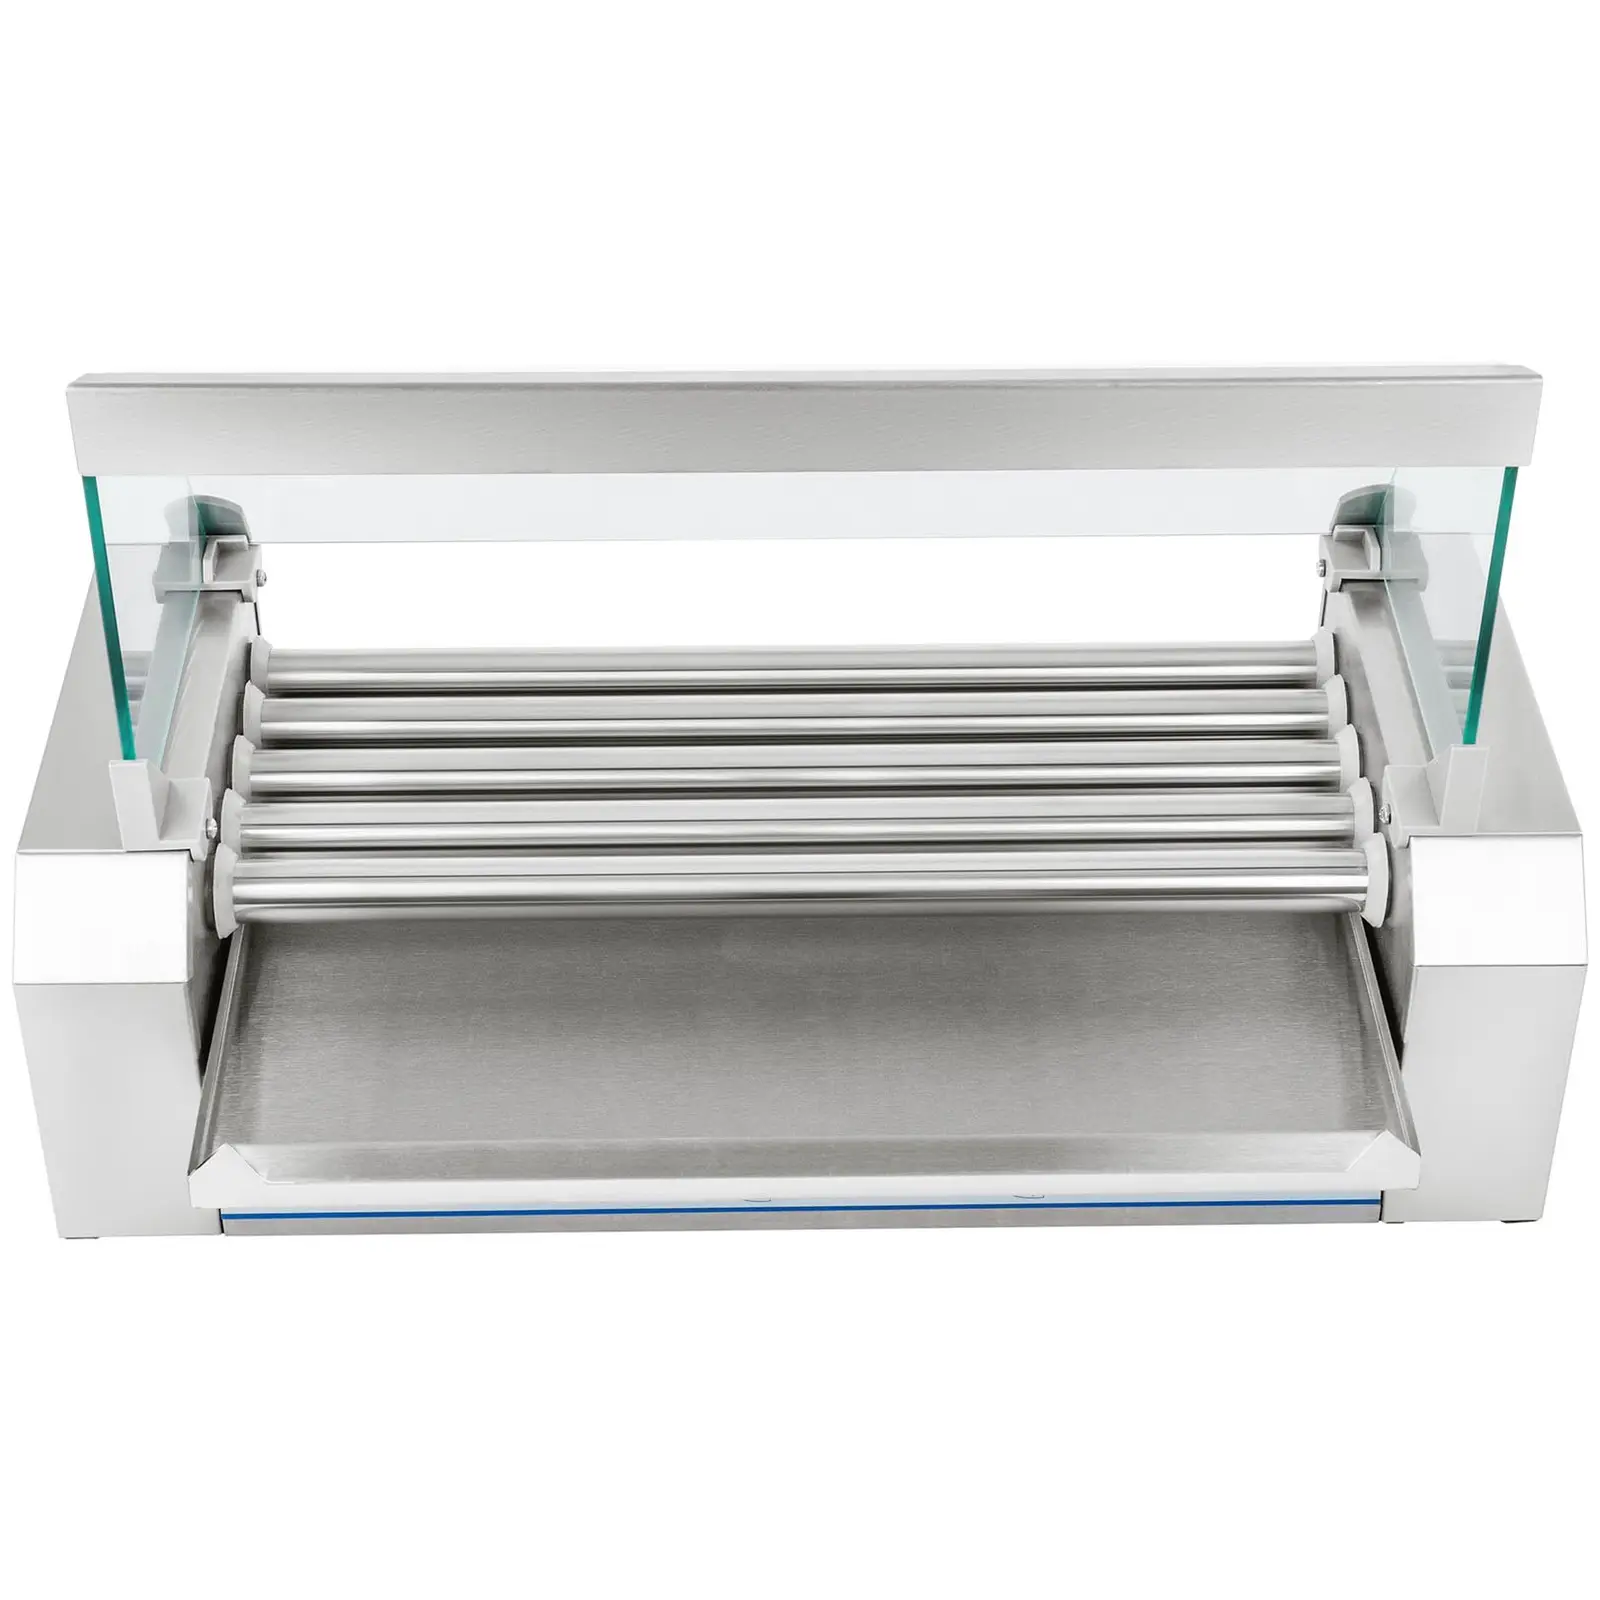 Hot Dog Grill - 5 rollers - stainless steel